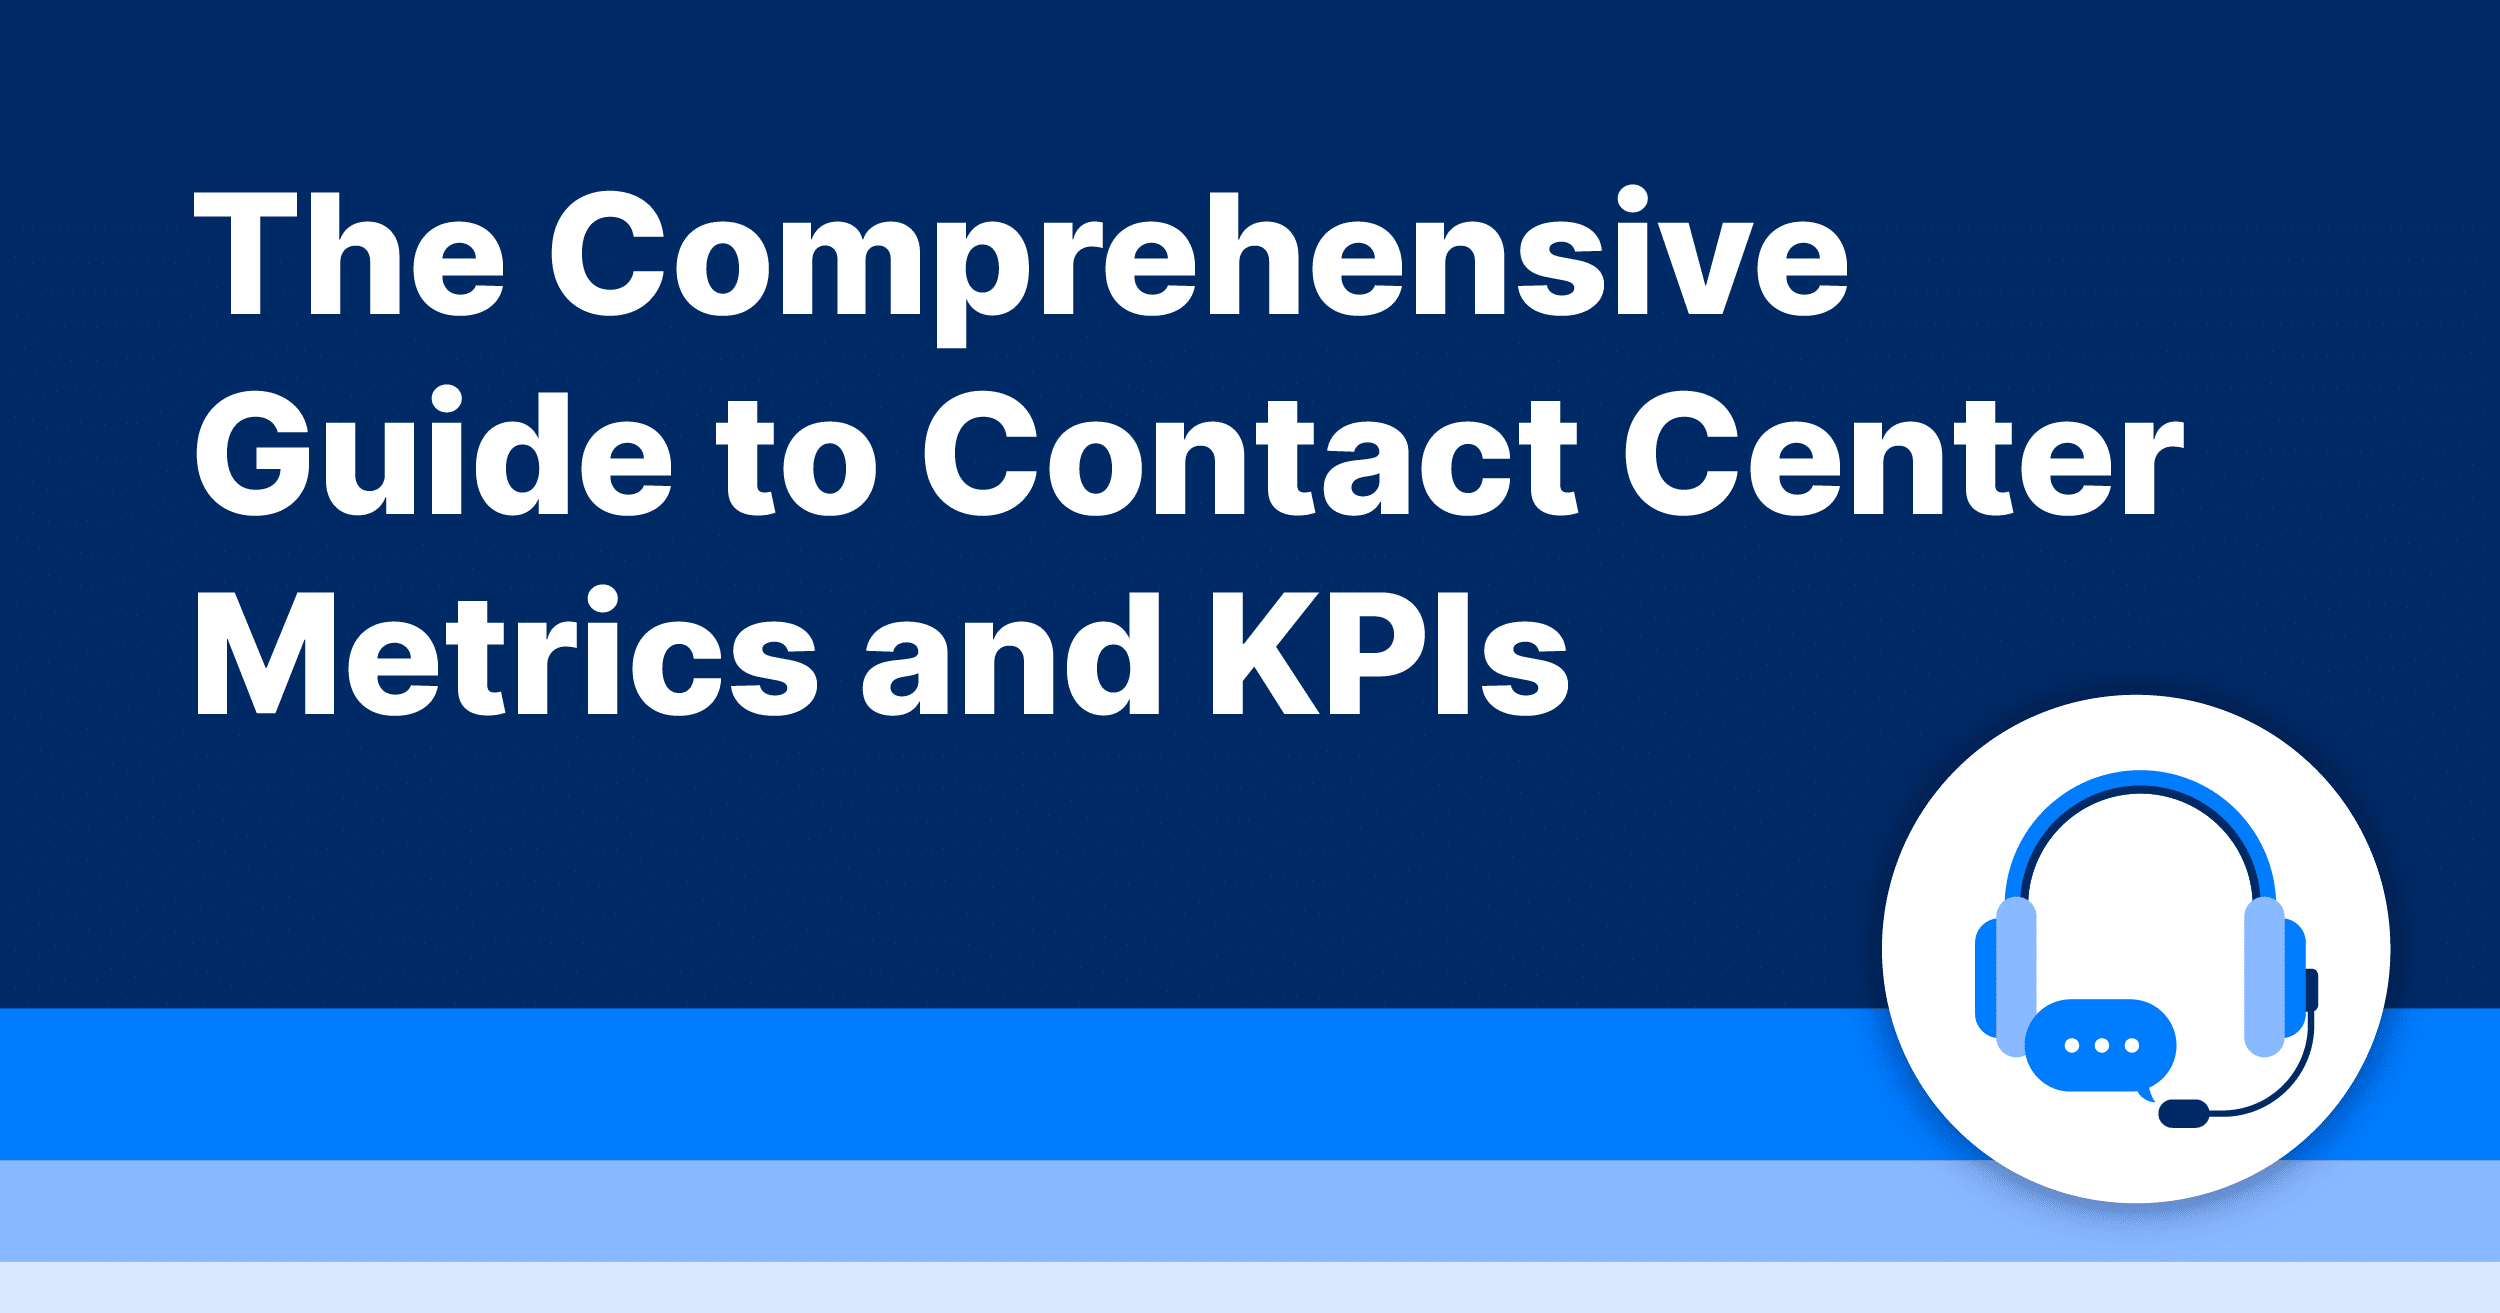 The Comprehensive Guide to Contact Center Metrics and KPIs